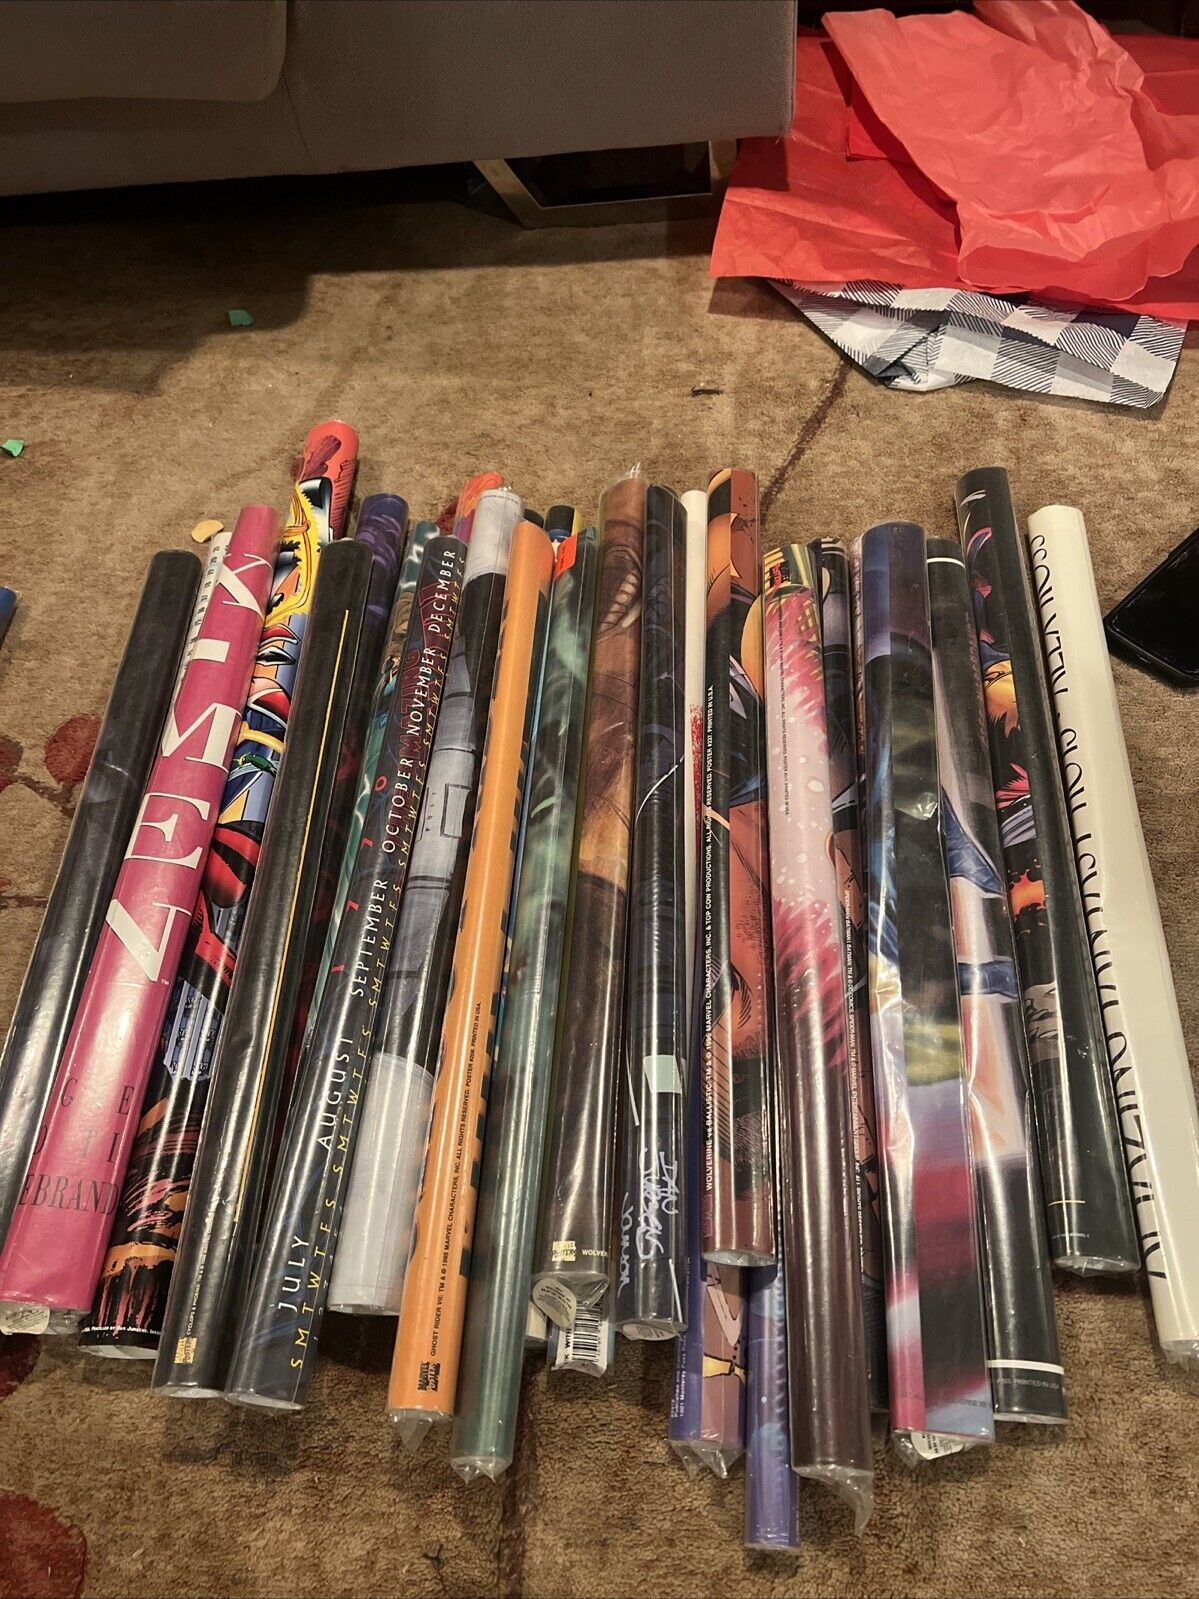 Many 1995-1996 Marvel Posters. All Brand New And Sealed. Each Poster=$30. Offers